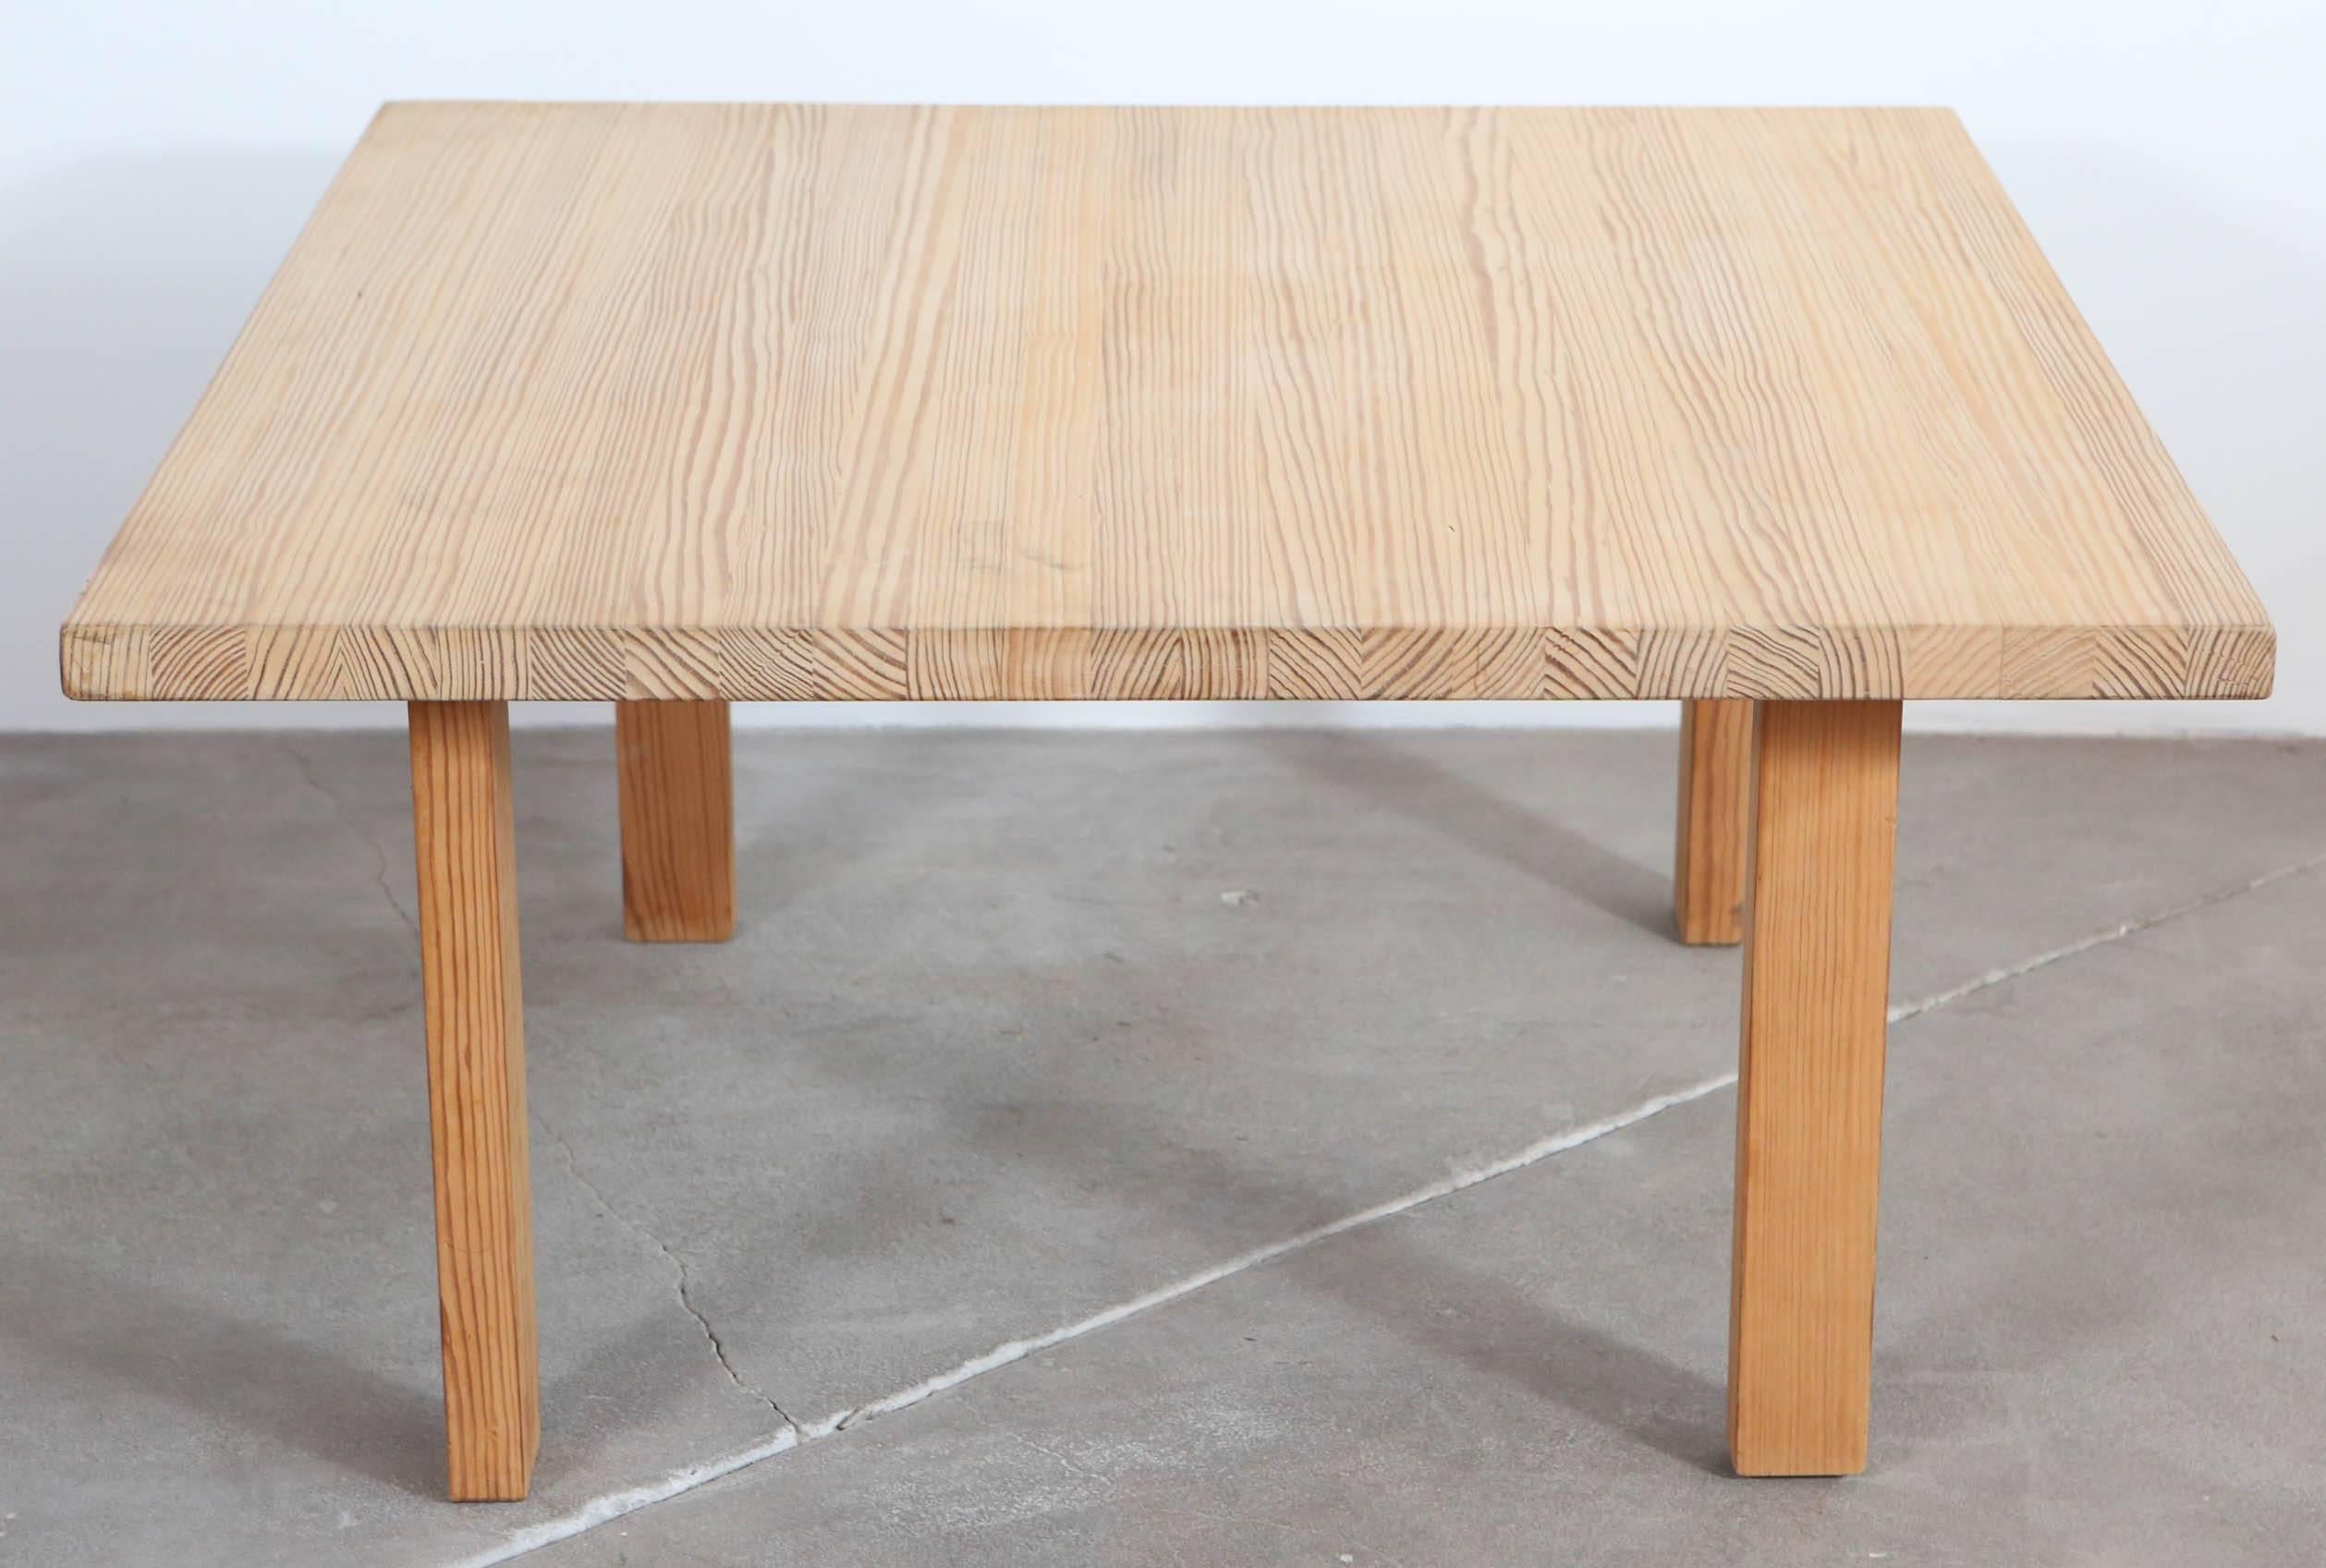 Tall square pine coffee table.